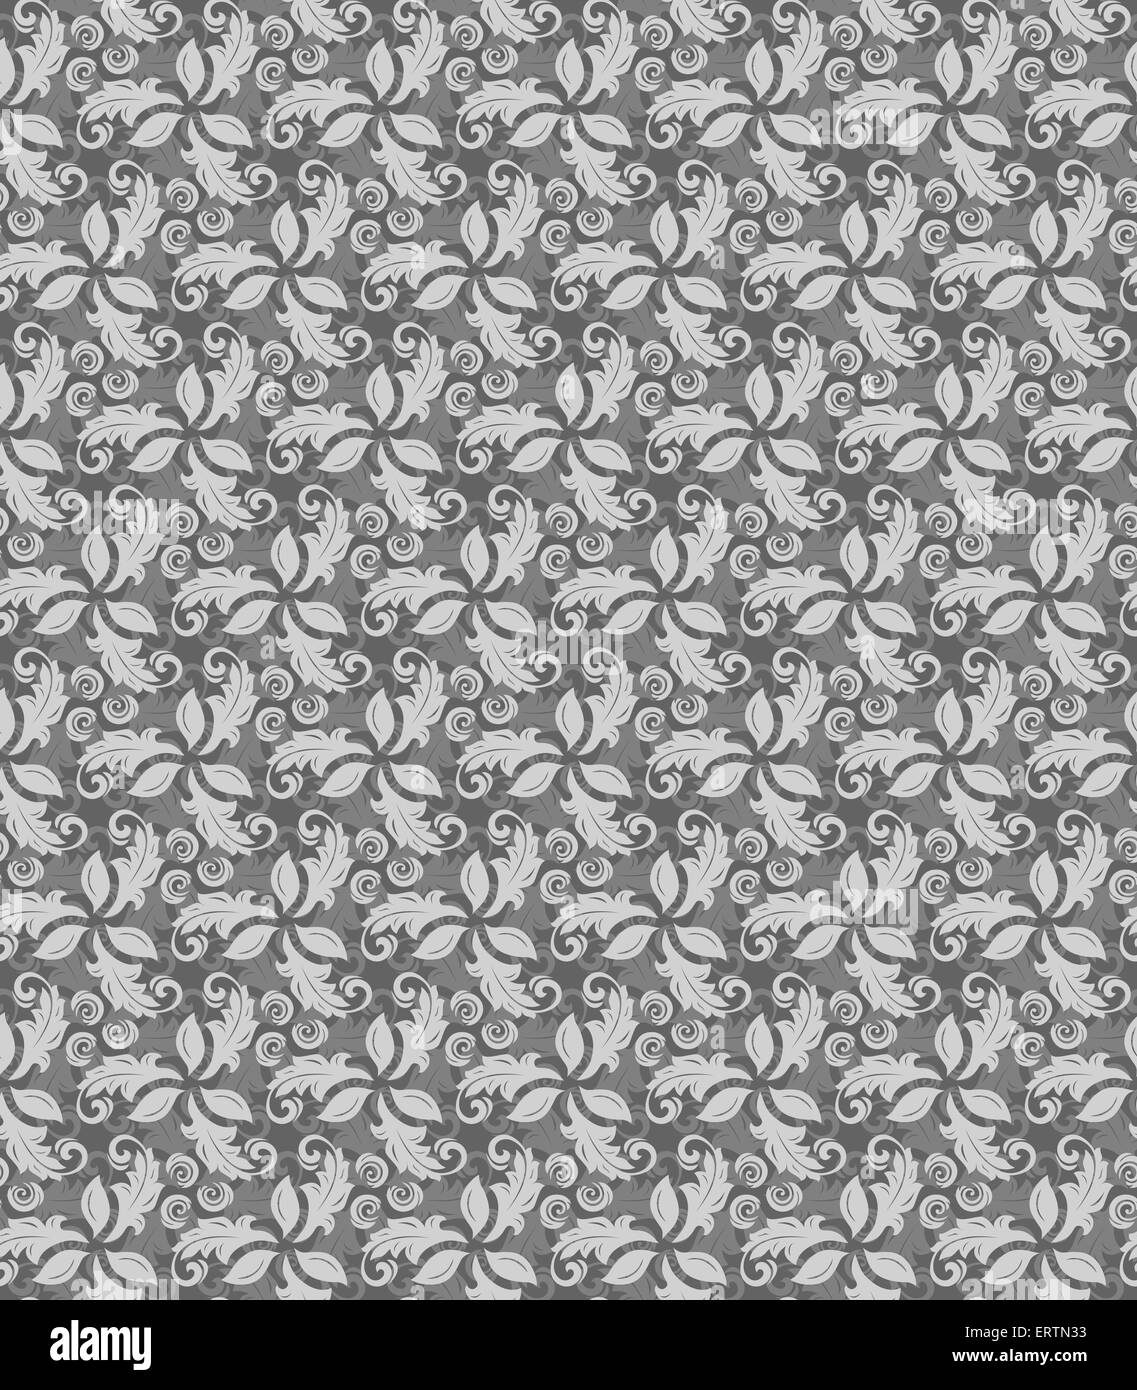 Floral Seamless  Pattern Stock Photo